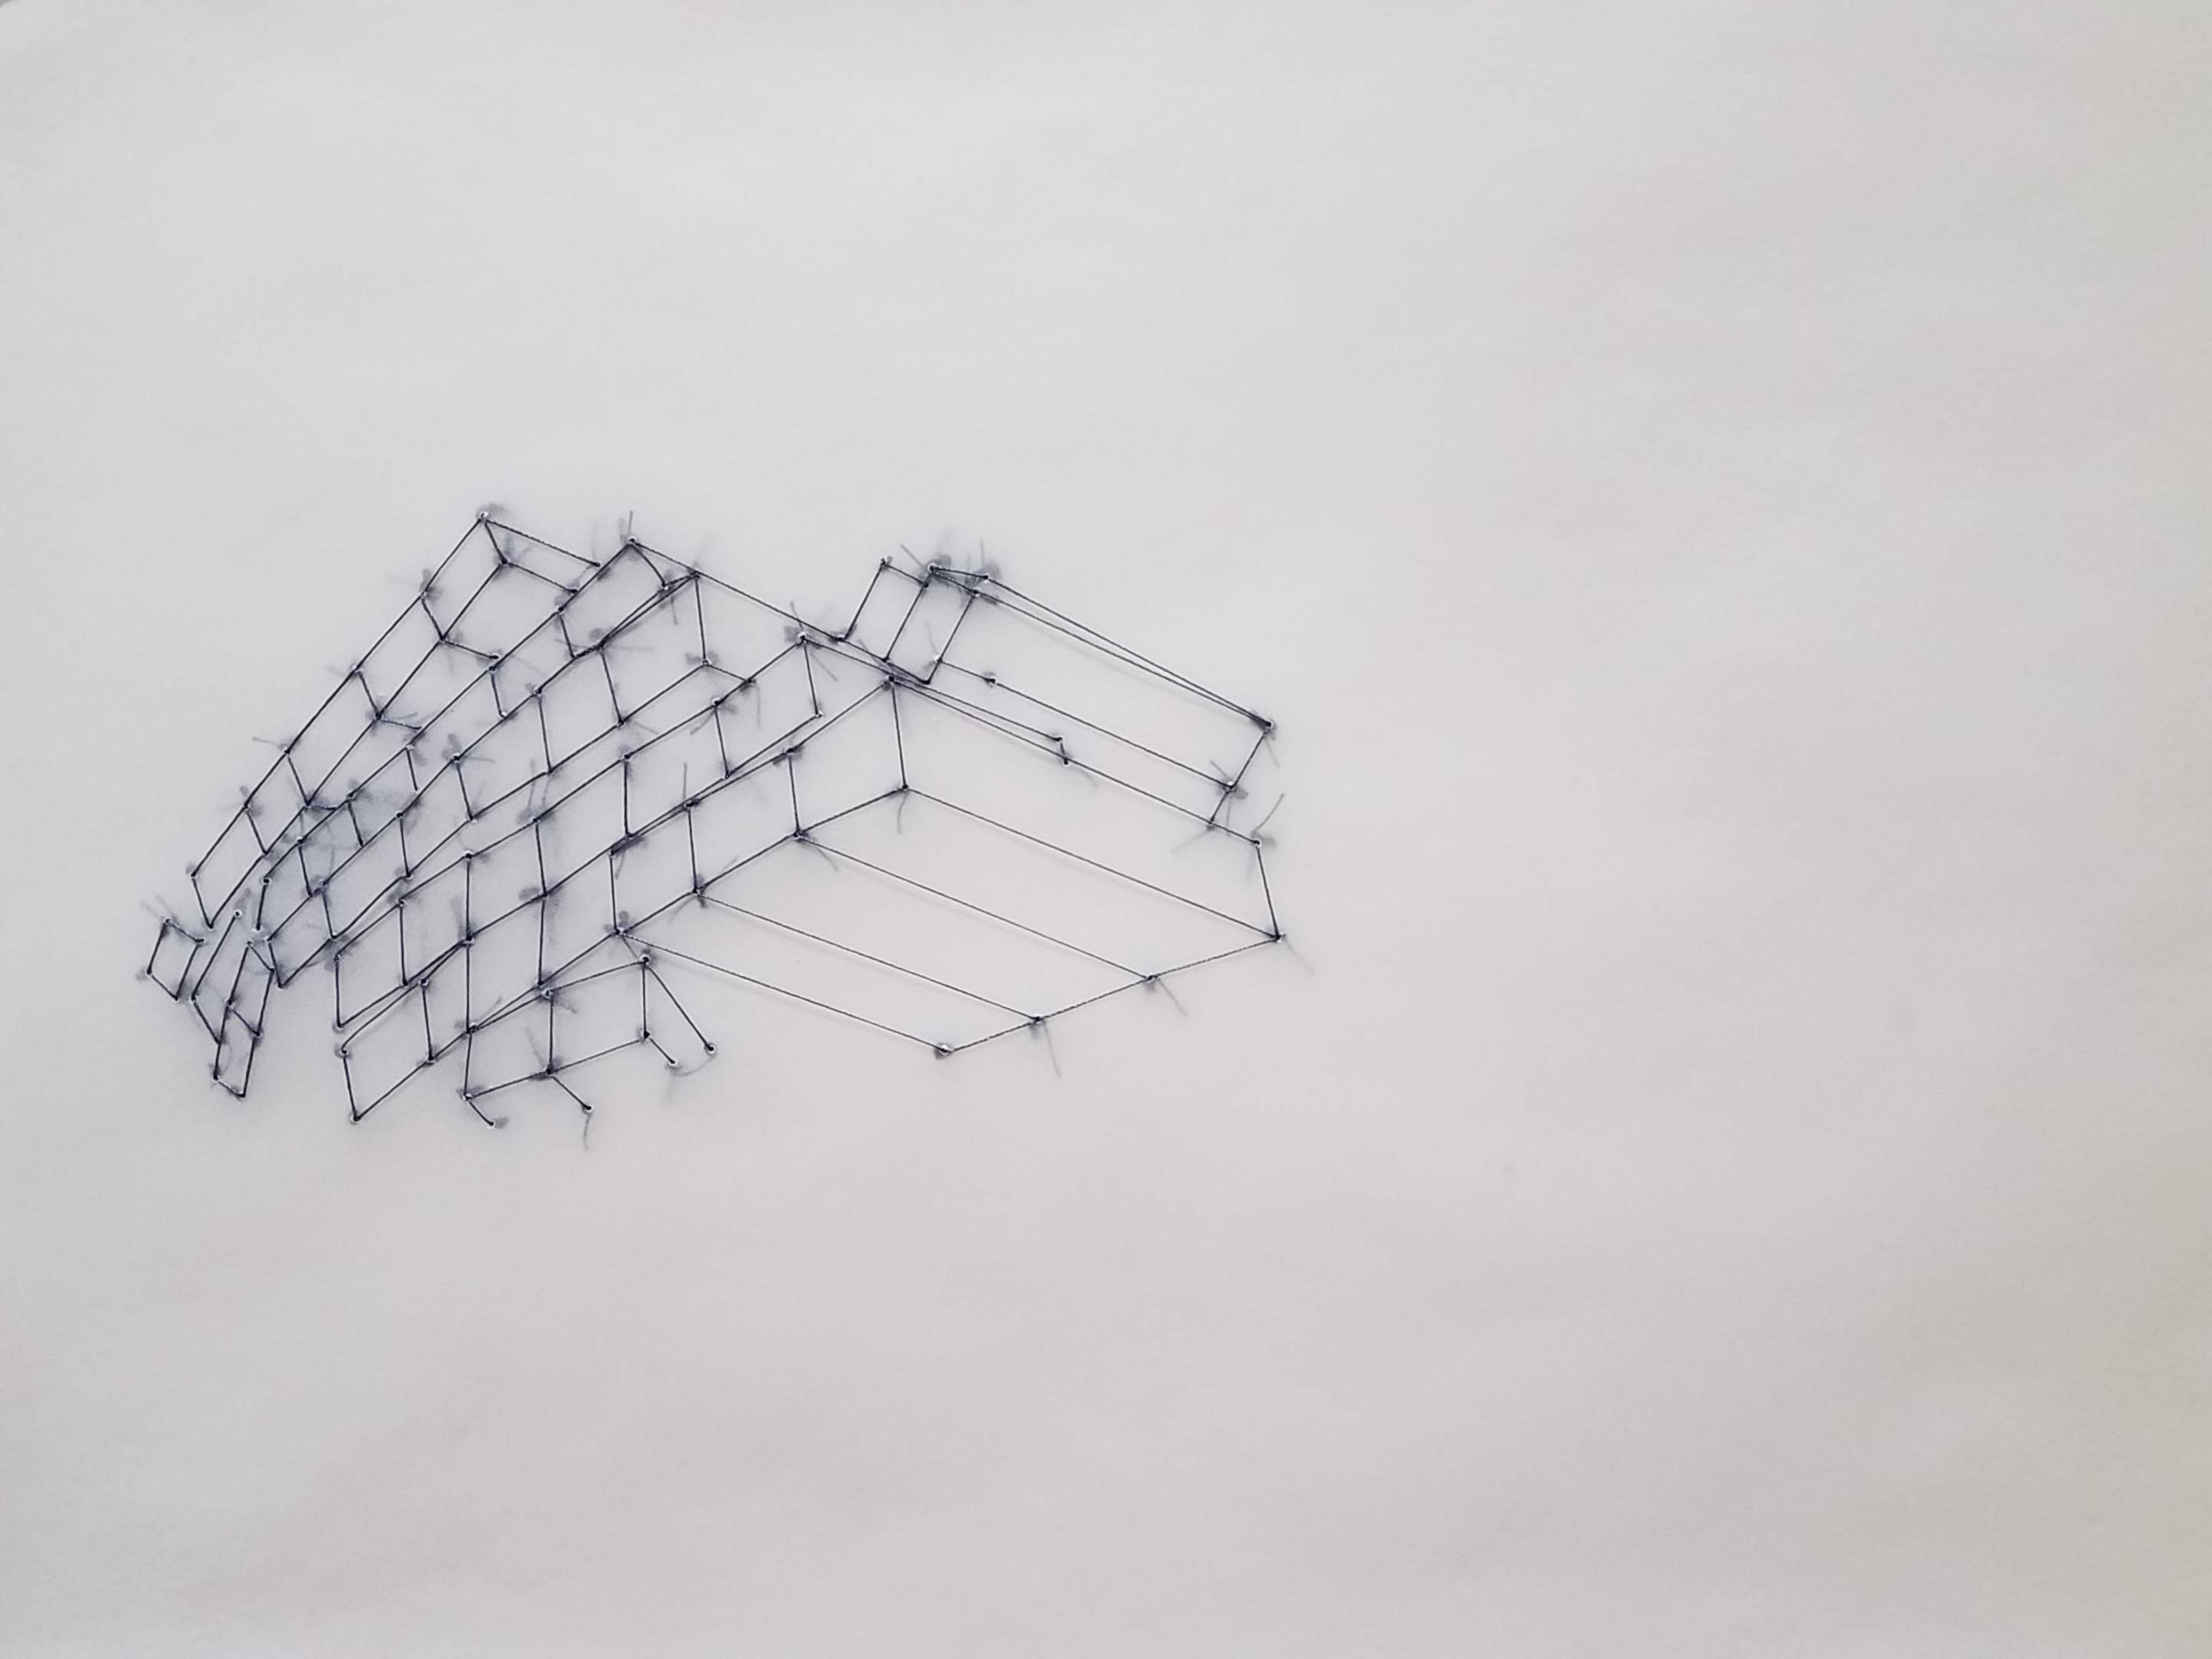 
The drawings in this series are from photos of marine accidents, and made of thread, knots, and vellum.  All were completed in 2019.

At sea, stacks of containers topple from a loaded cargo ship.  The containers separate, tear at each other, drop,